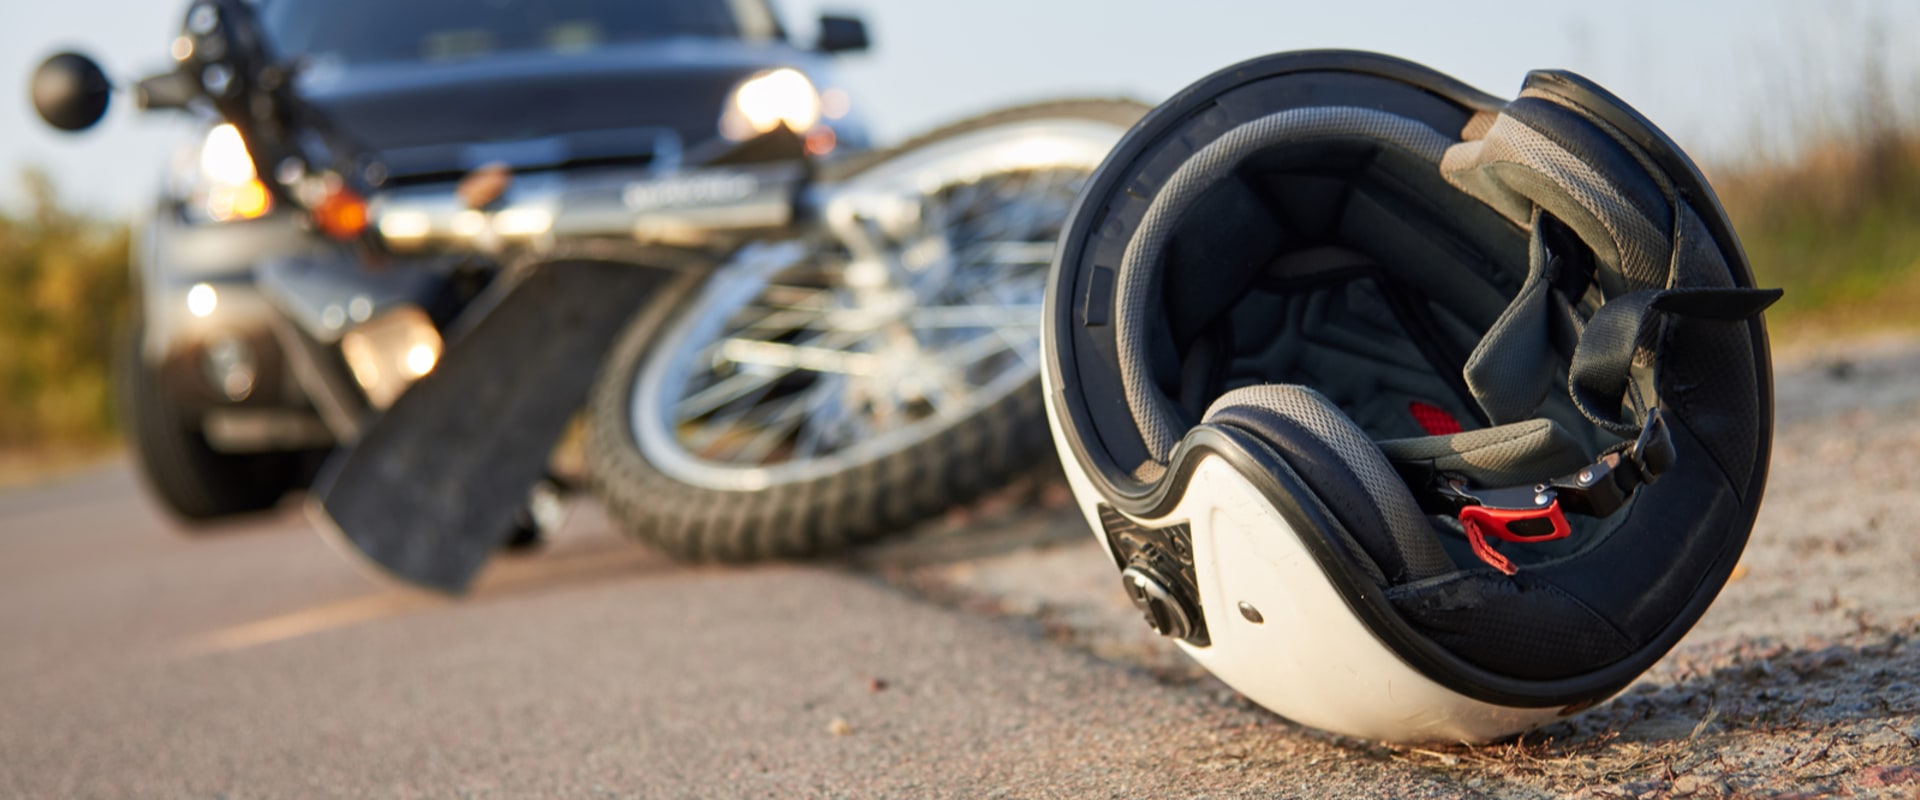 Motorcycle Accident Claims for Head Injury